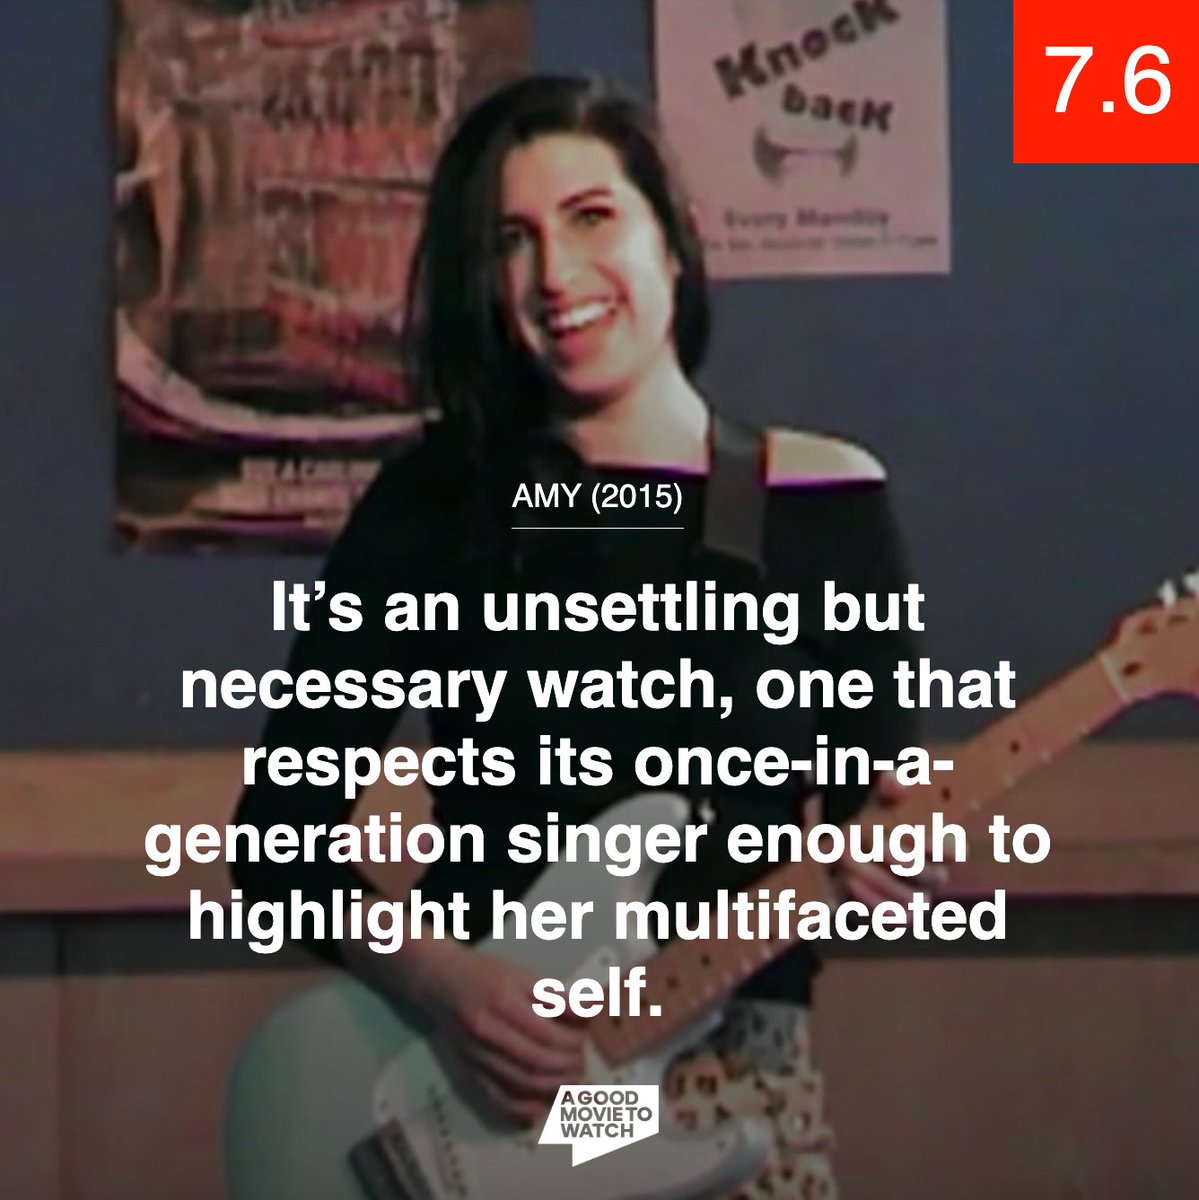 Skip the biopic and opt for the documentary AMY instead, streaming on @StreamOnMax agoodmovietowatch.com/amy-2015/